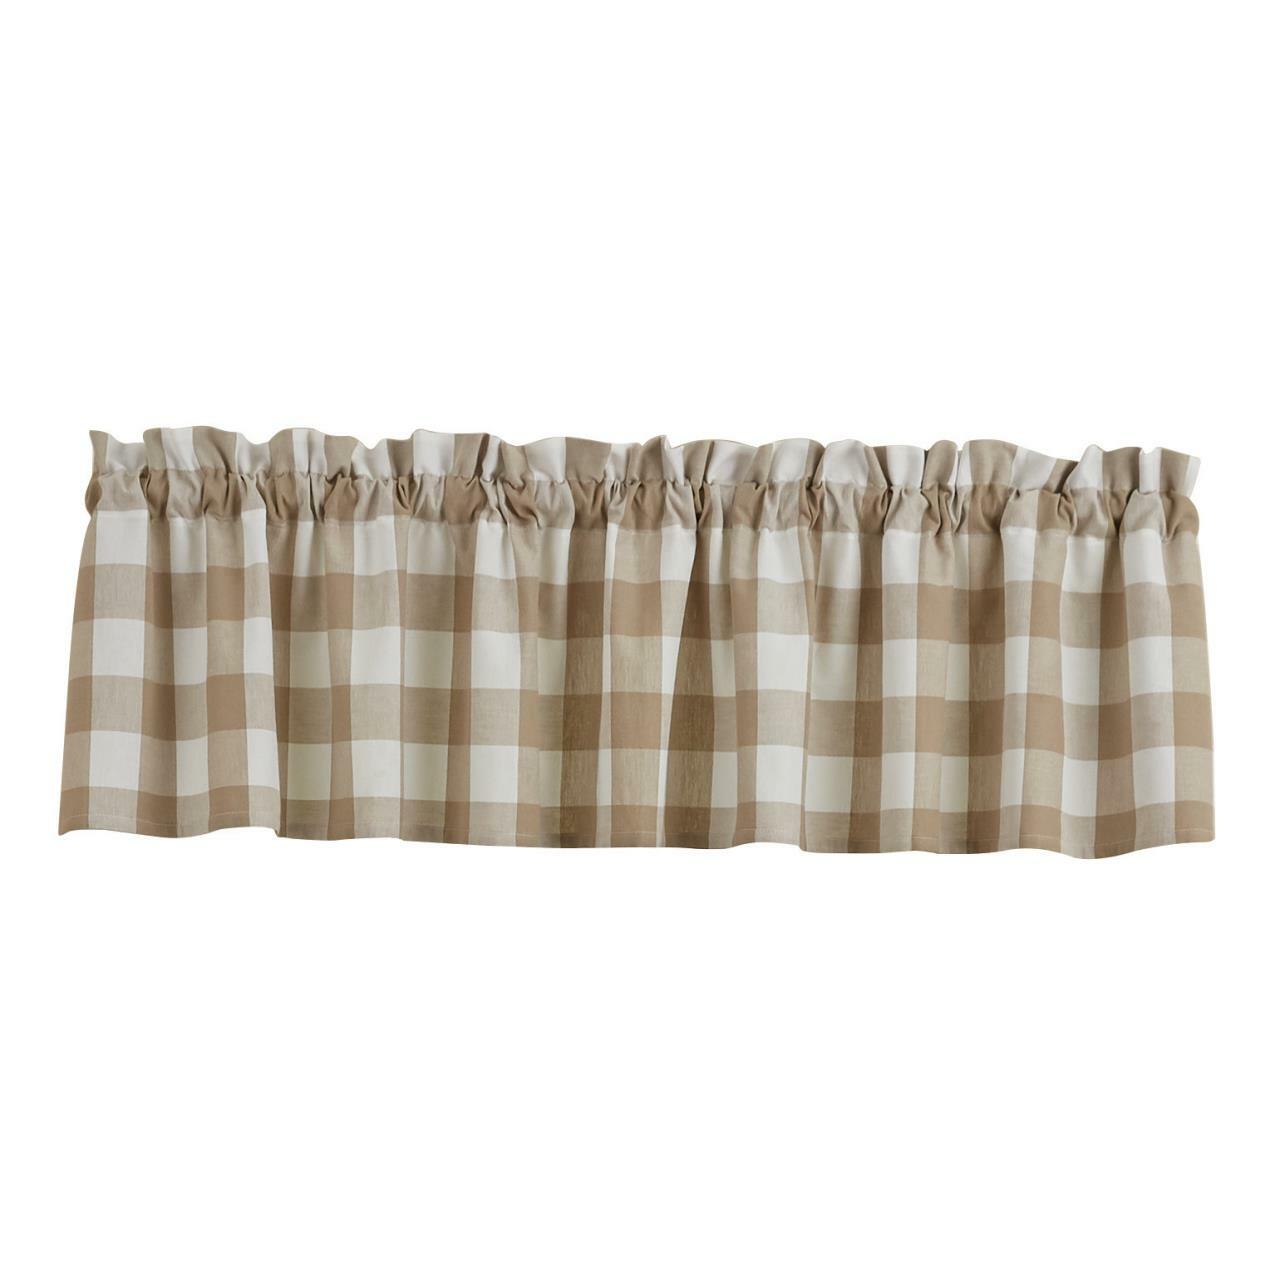 Park Wicklow Check Valance Natural Unlined 72 x 14 Inches